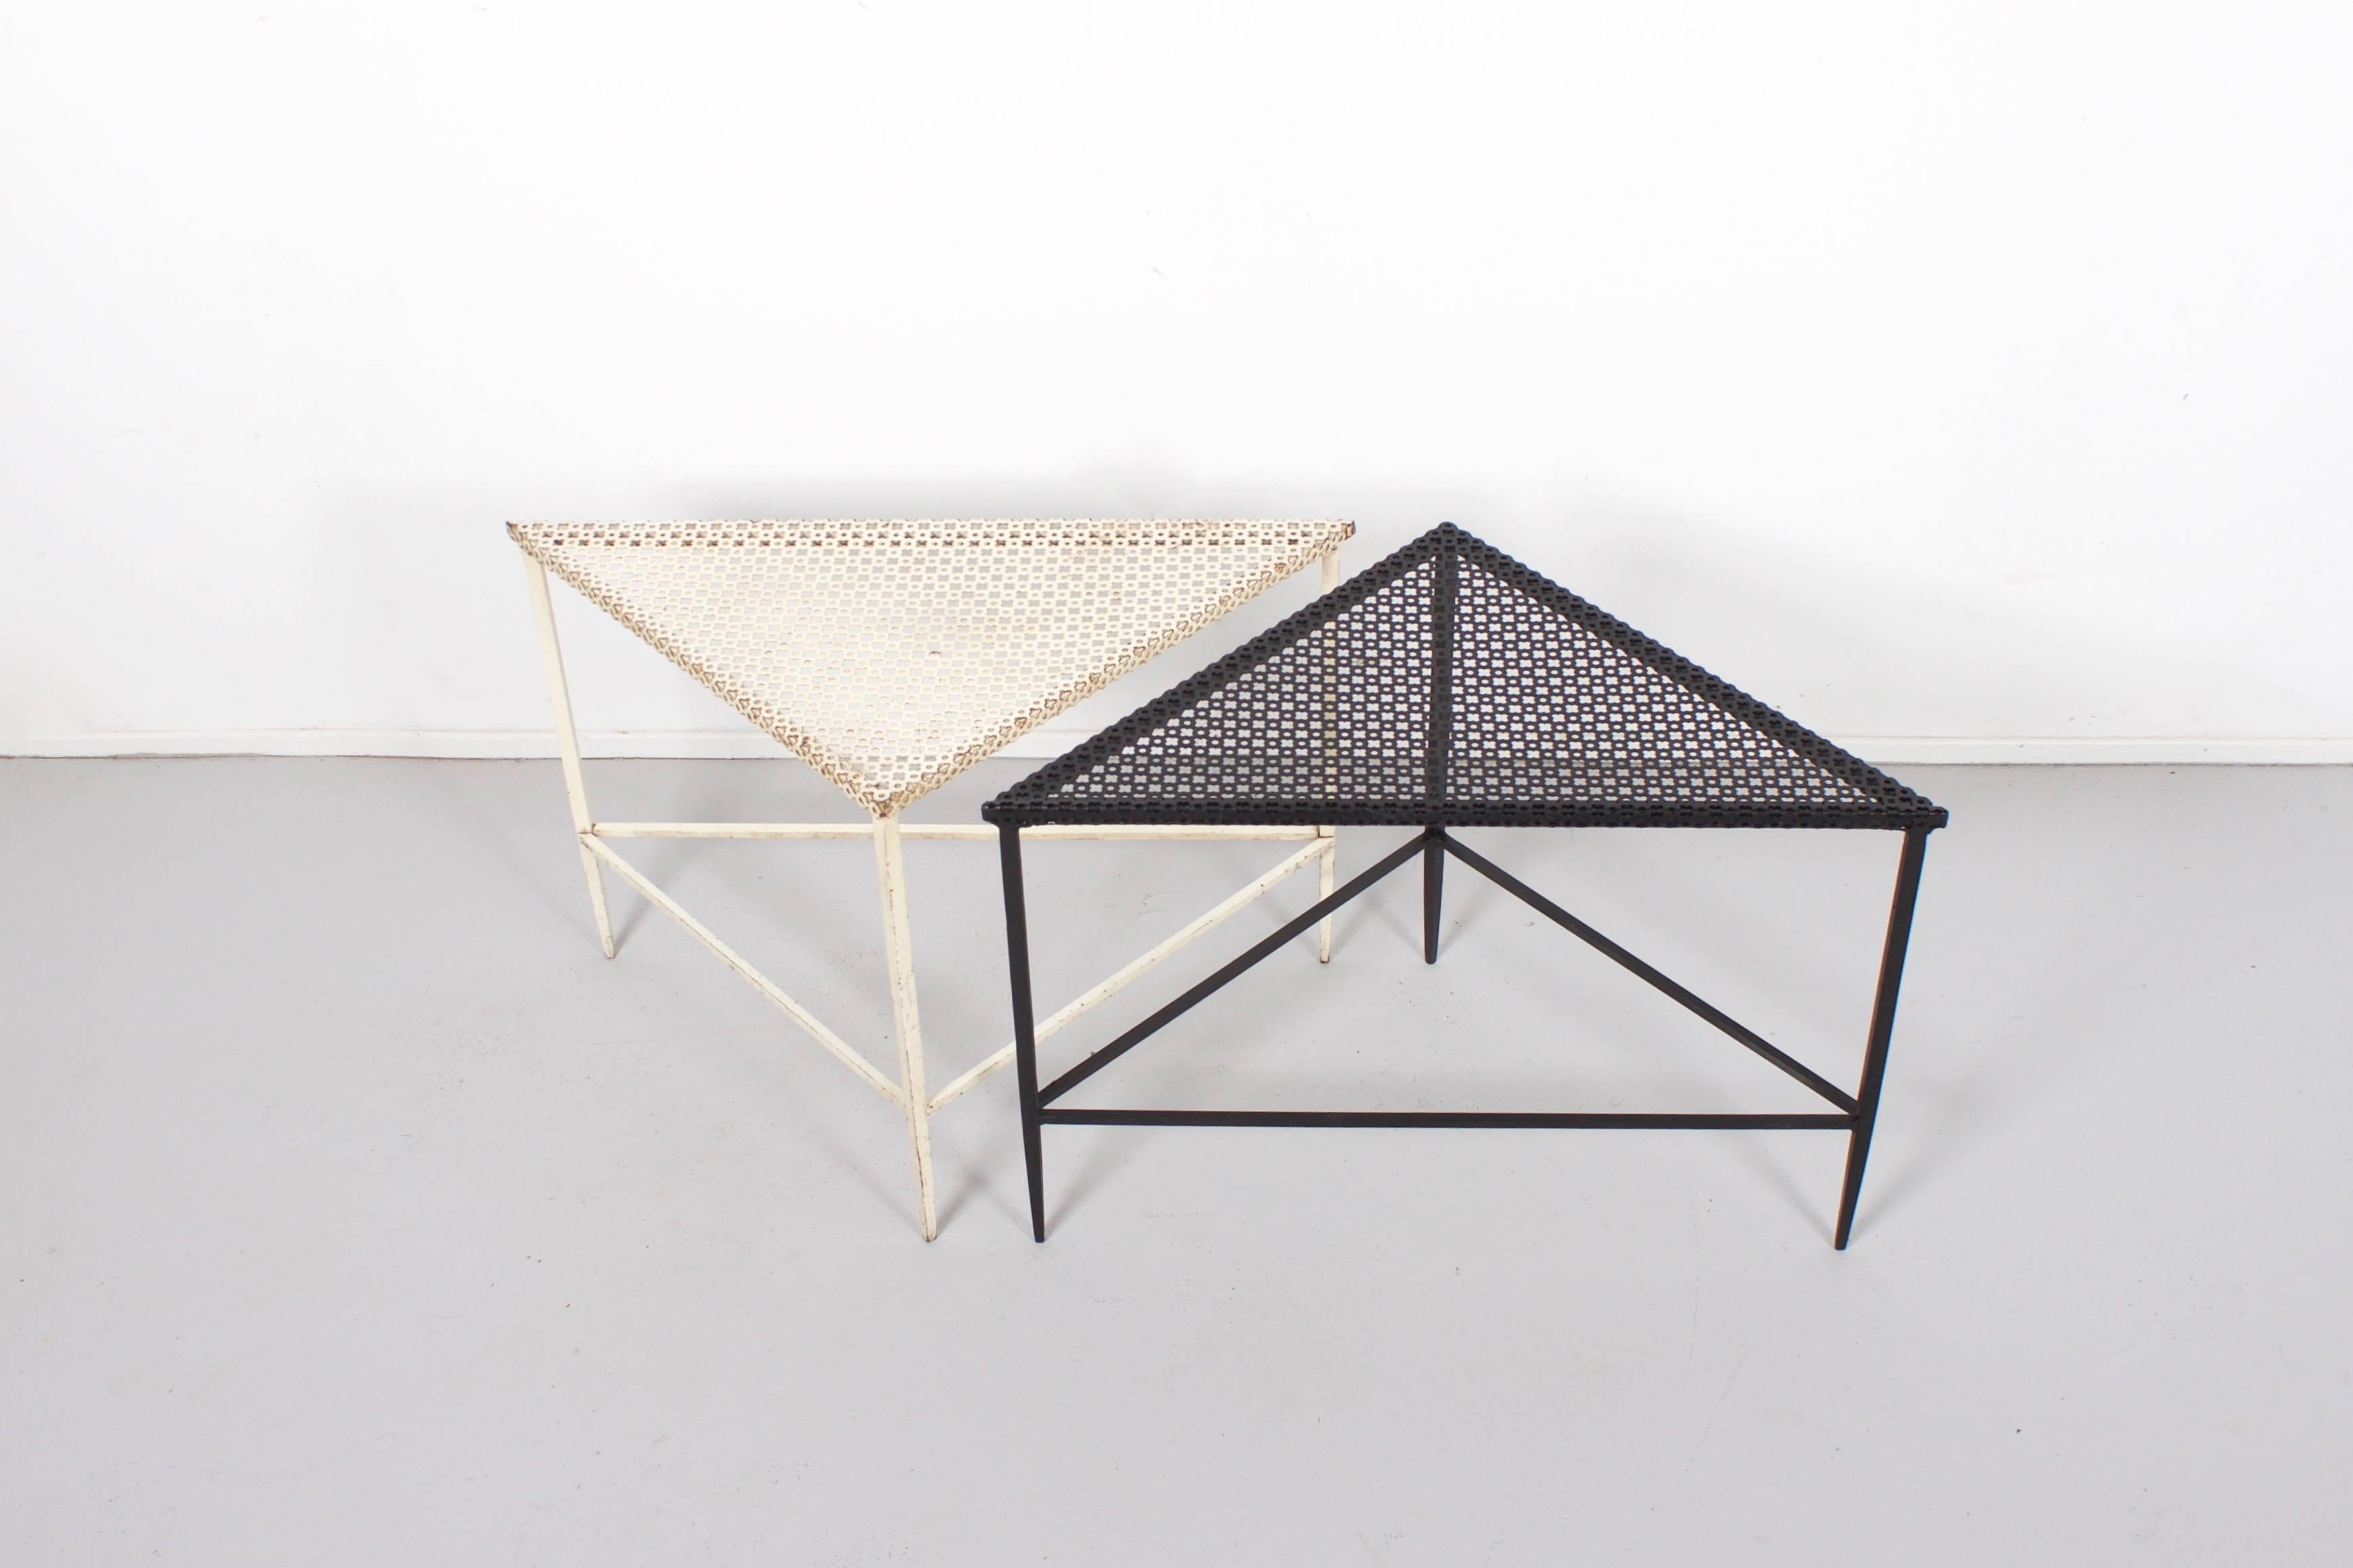 Beautiful pair of Mathieu Matégot tables in good condition.

Manufactured by Artimeta in the 1950s

Perforated metal top and frame lacquered in black and white. 

Because of the triangular shape of the tables they can be combined in many ways.

A